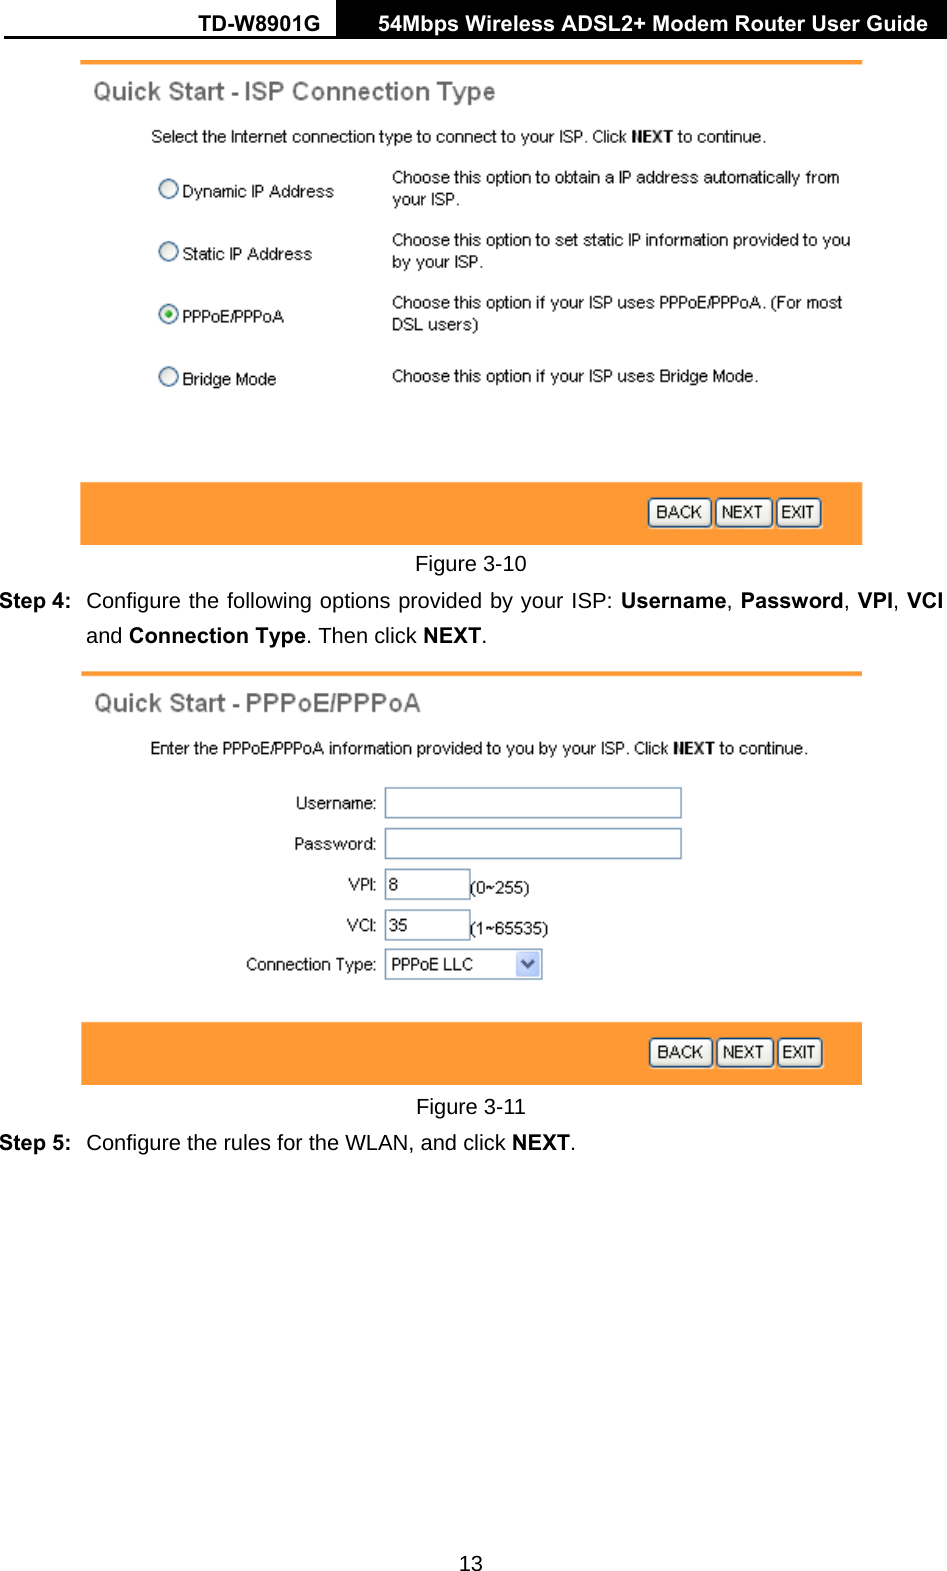 TD-W8901G   54Mbps Wireless ADSL2+ Modem Router User Guide 13  Figure 3-10 Step 4:  Configure the following options provided by your ISP: Username, Password, VPI, VCI and Connection Type. Then click NEXT.  Figure 3-11 Step 5:  Configure the rules for the WLAN, and click NEXT. 